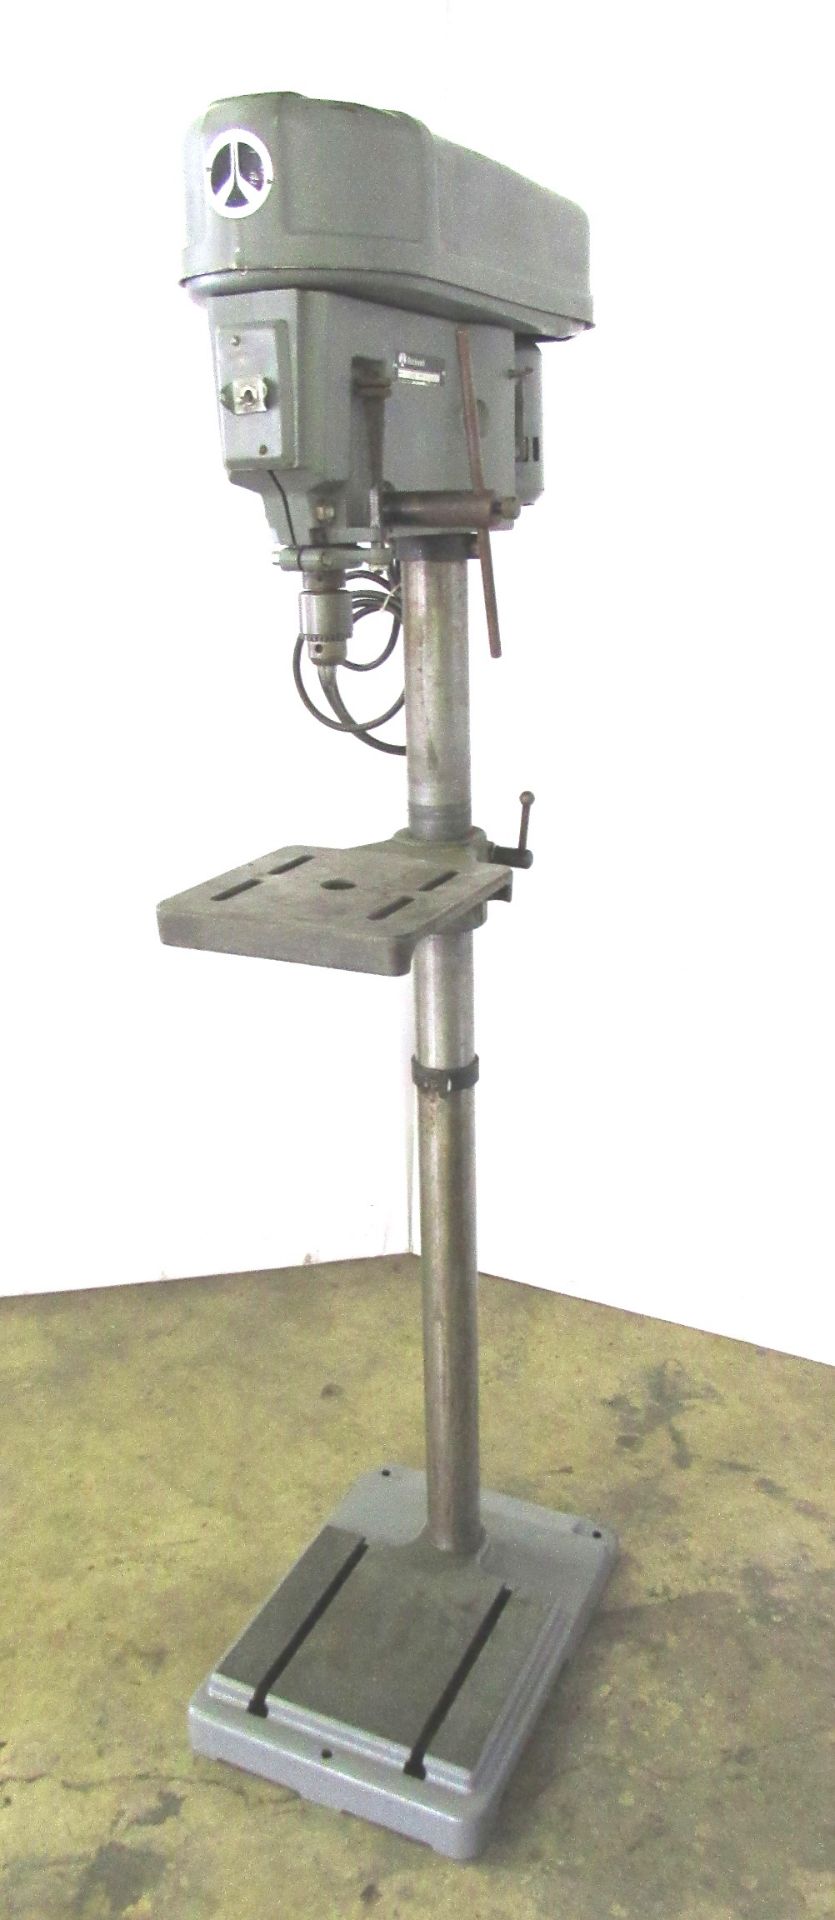 Rockwell Cat. 15-081 15" Floor Type Drill Press - Image 2 of 2